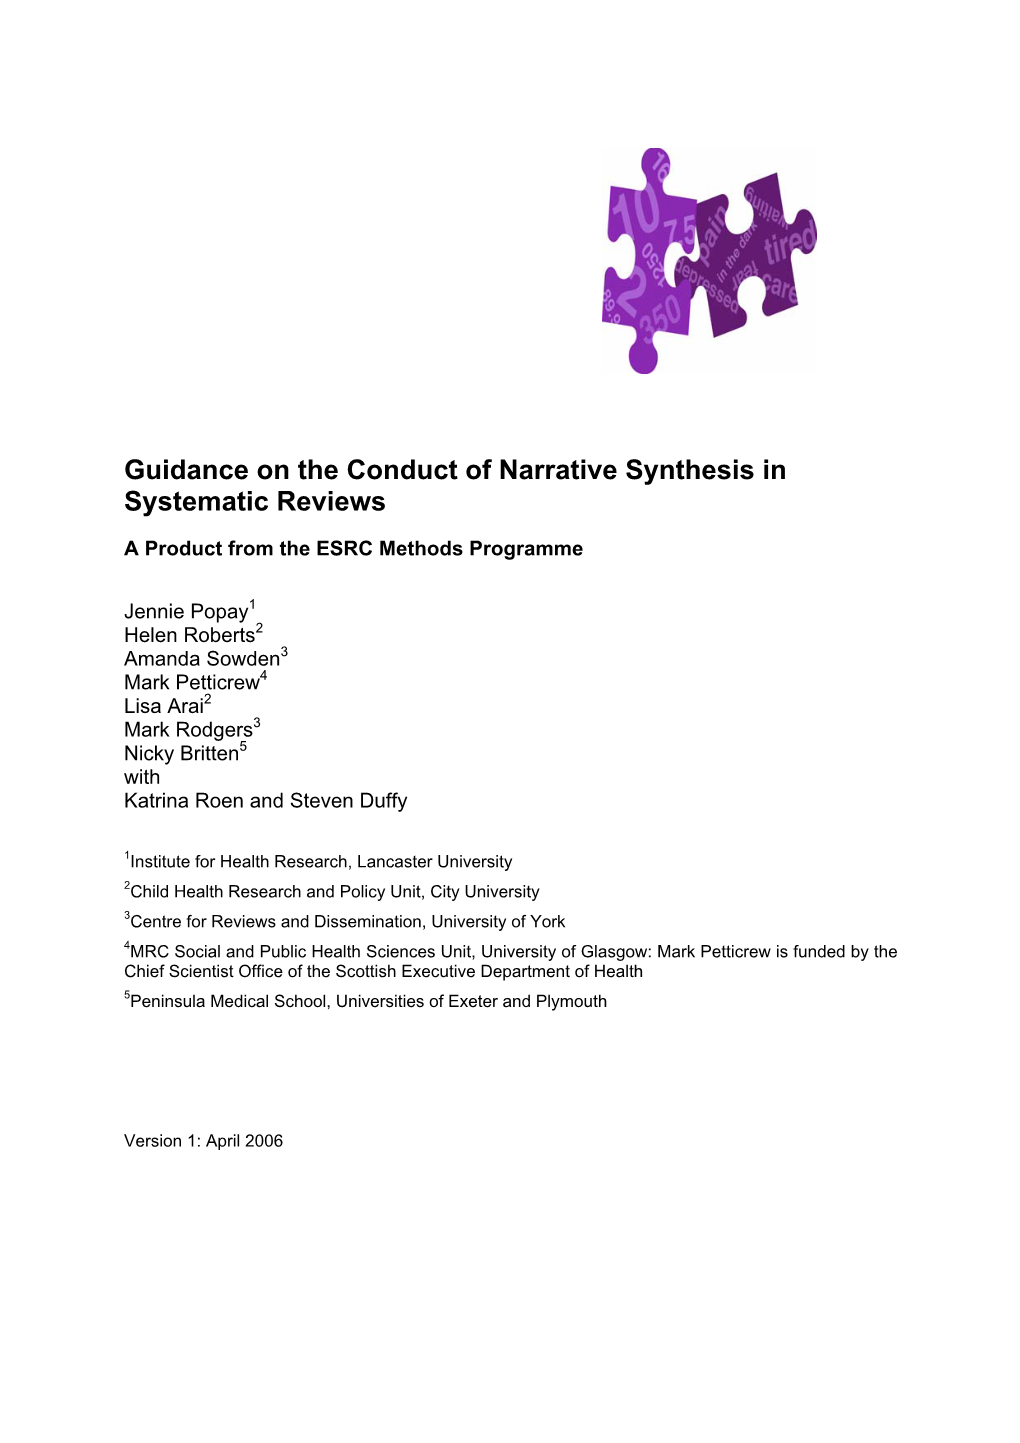 Guidance on the Conduct of Narrative Synthesis in Systematic Reviews